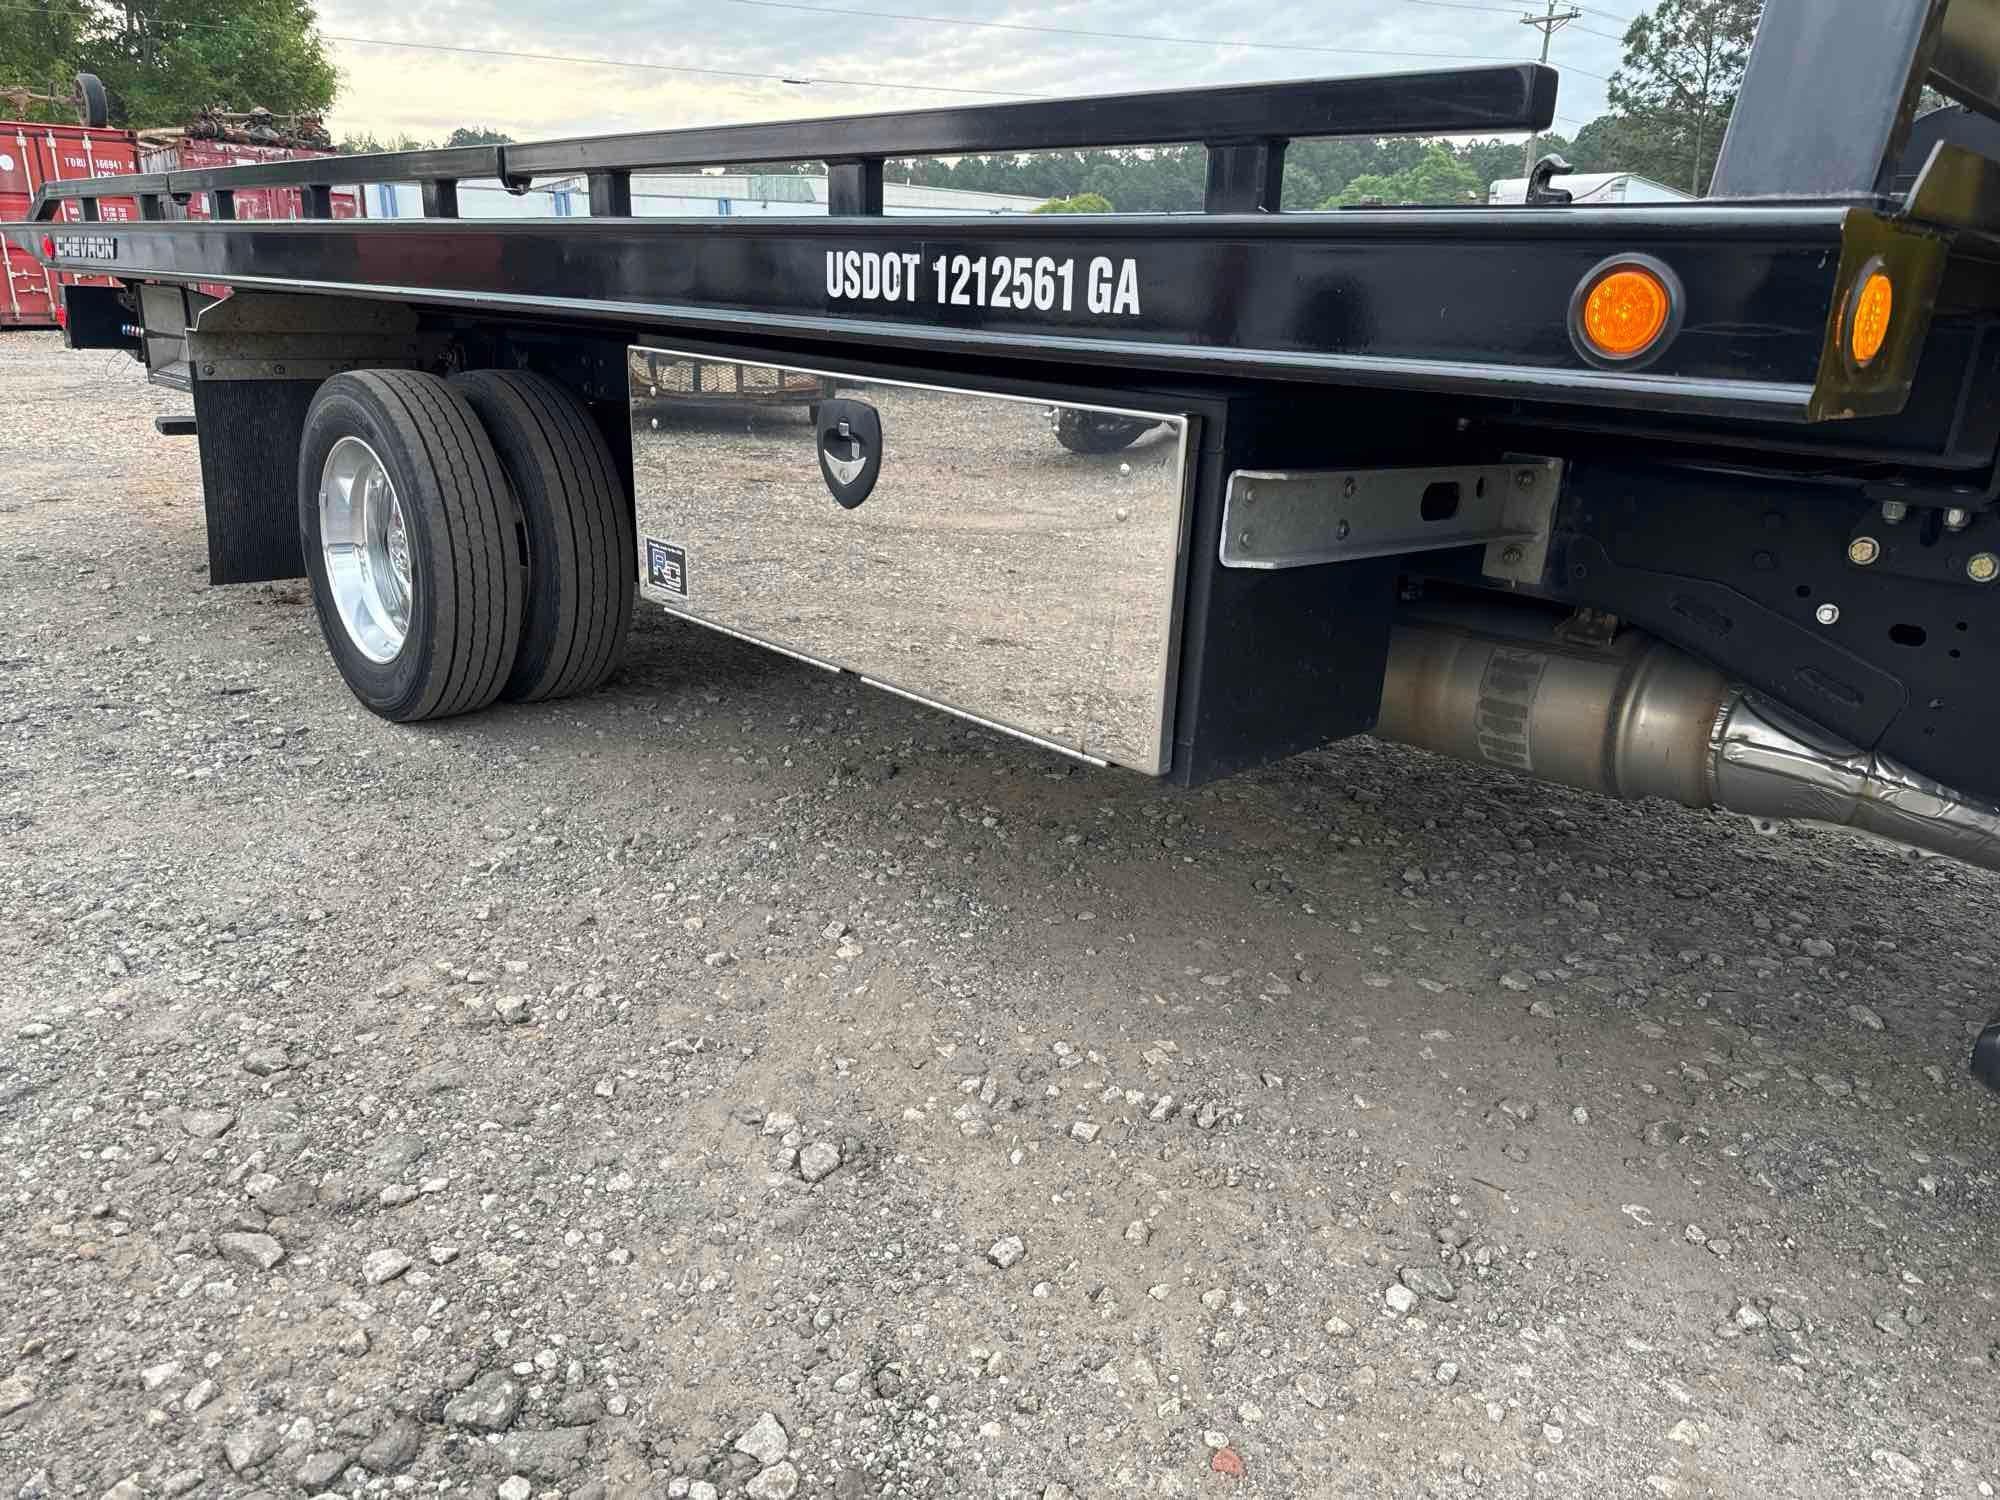 2021 Ram 5500 Chassis Truck, VIN # 3C7WRMDL7MG621641